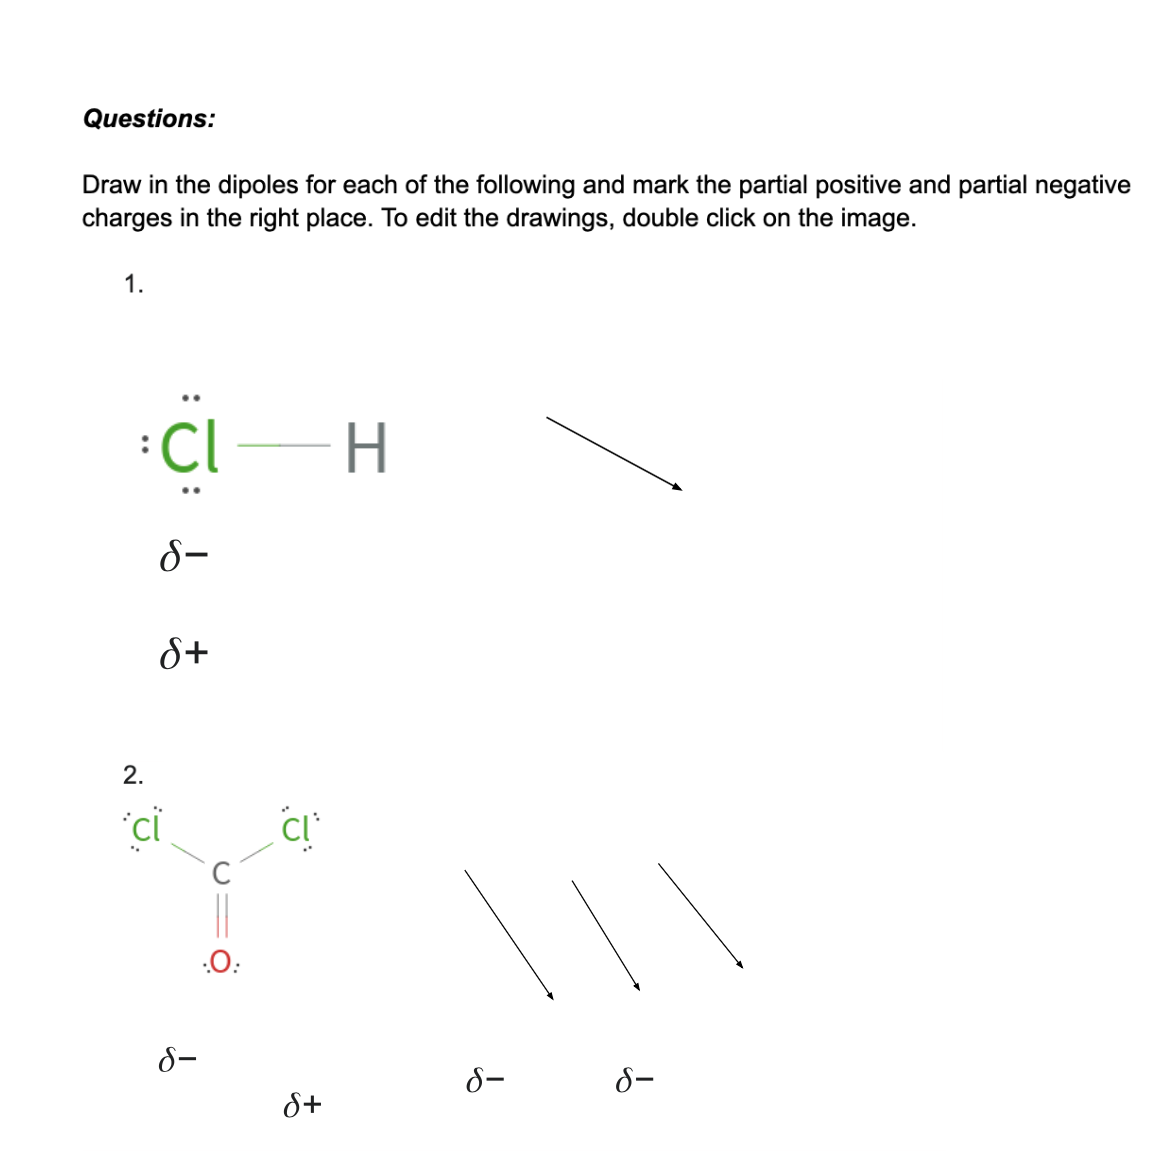 Questions:
Draw in the dipoles for each of the following and mark the partial positive and partial negative
charges in the right place. To edit the drawings, double click on the image.
1.
CI-H
8-
S+
2.
*ci
8-
.O:
S+
a
S-